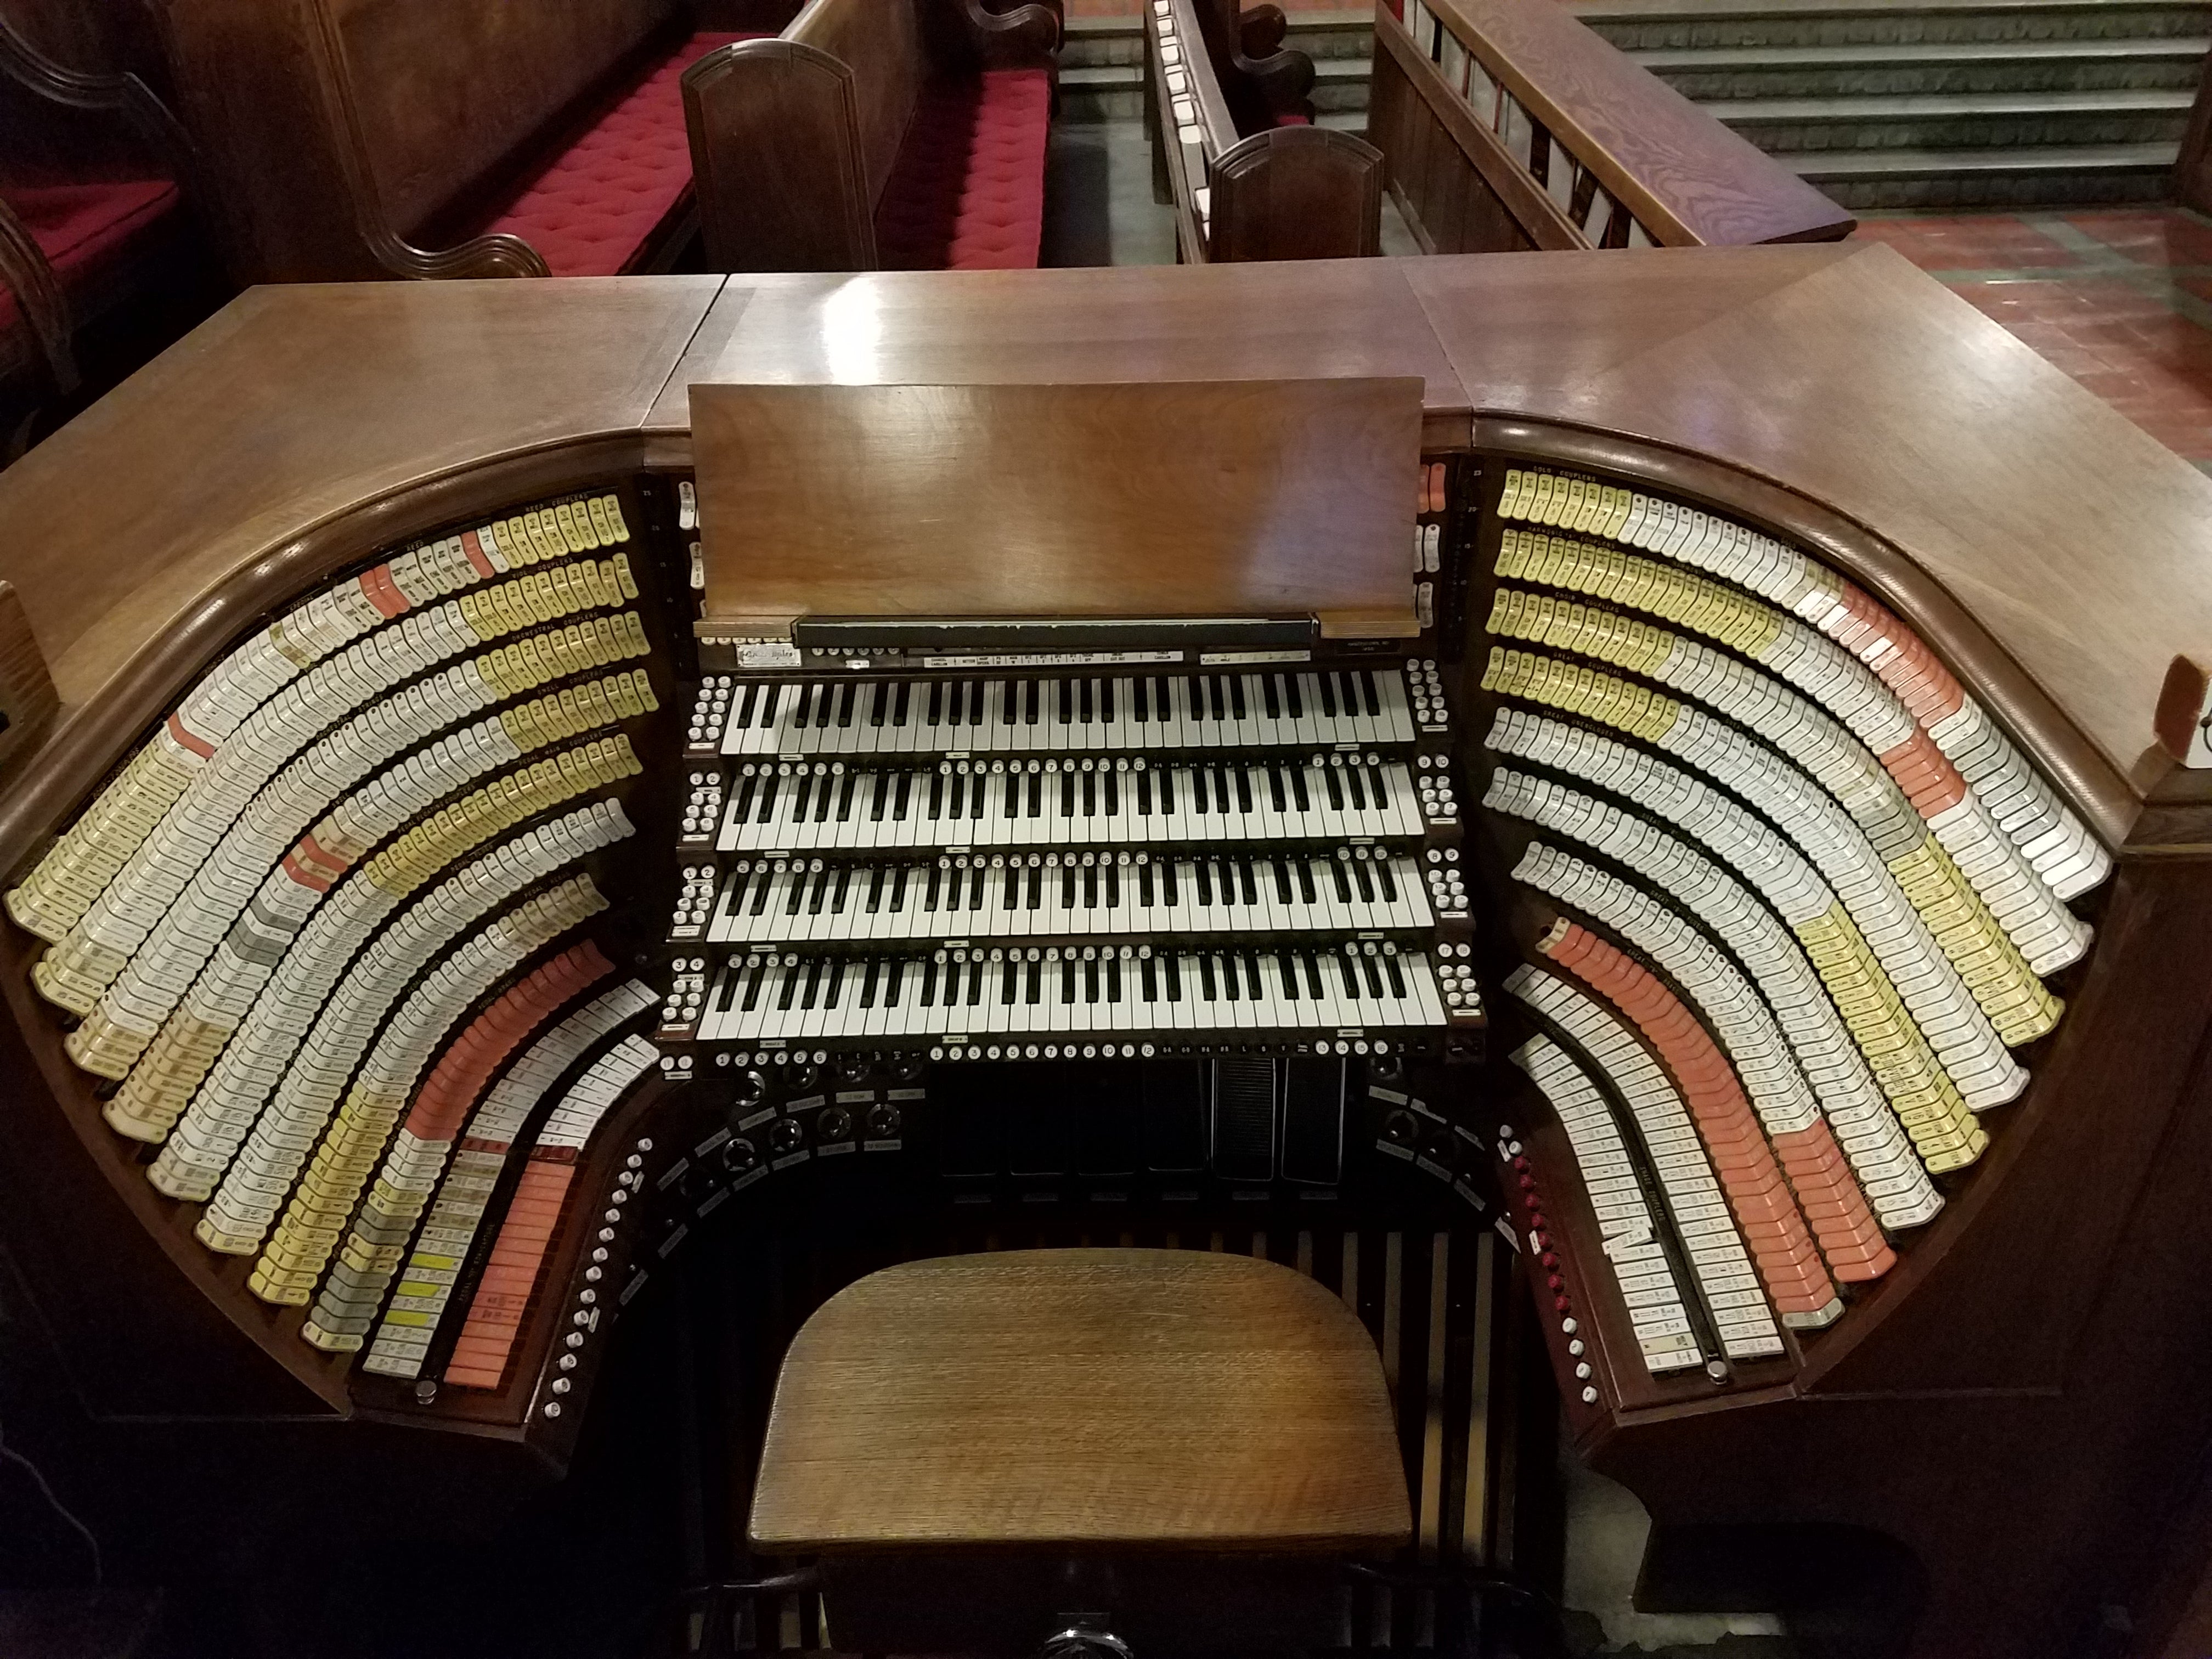 Organ Console in Cadet Chapel at West Point Military Academy - Largest chapel pipe organ in the world, 23,511 pipes - photo by John Siau